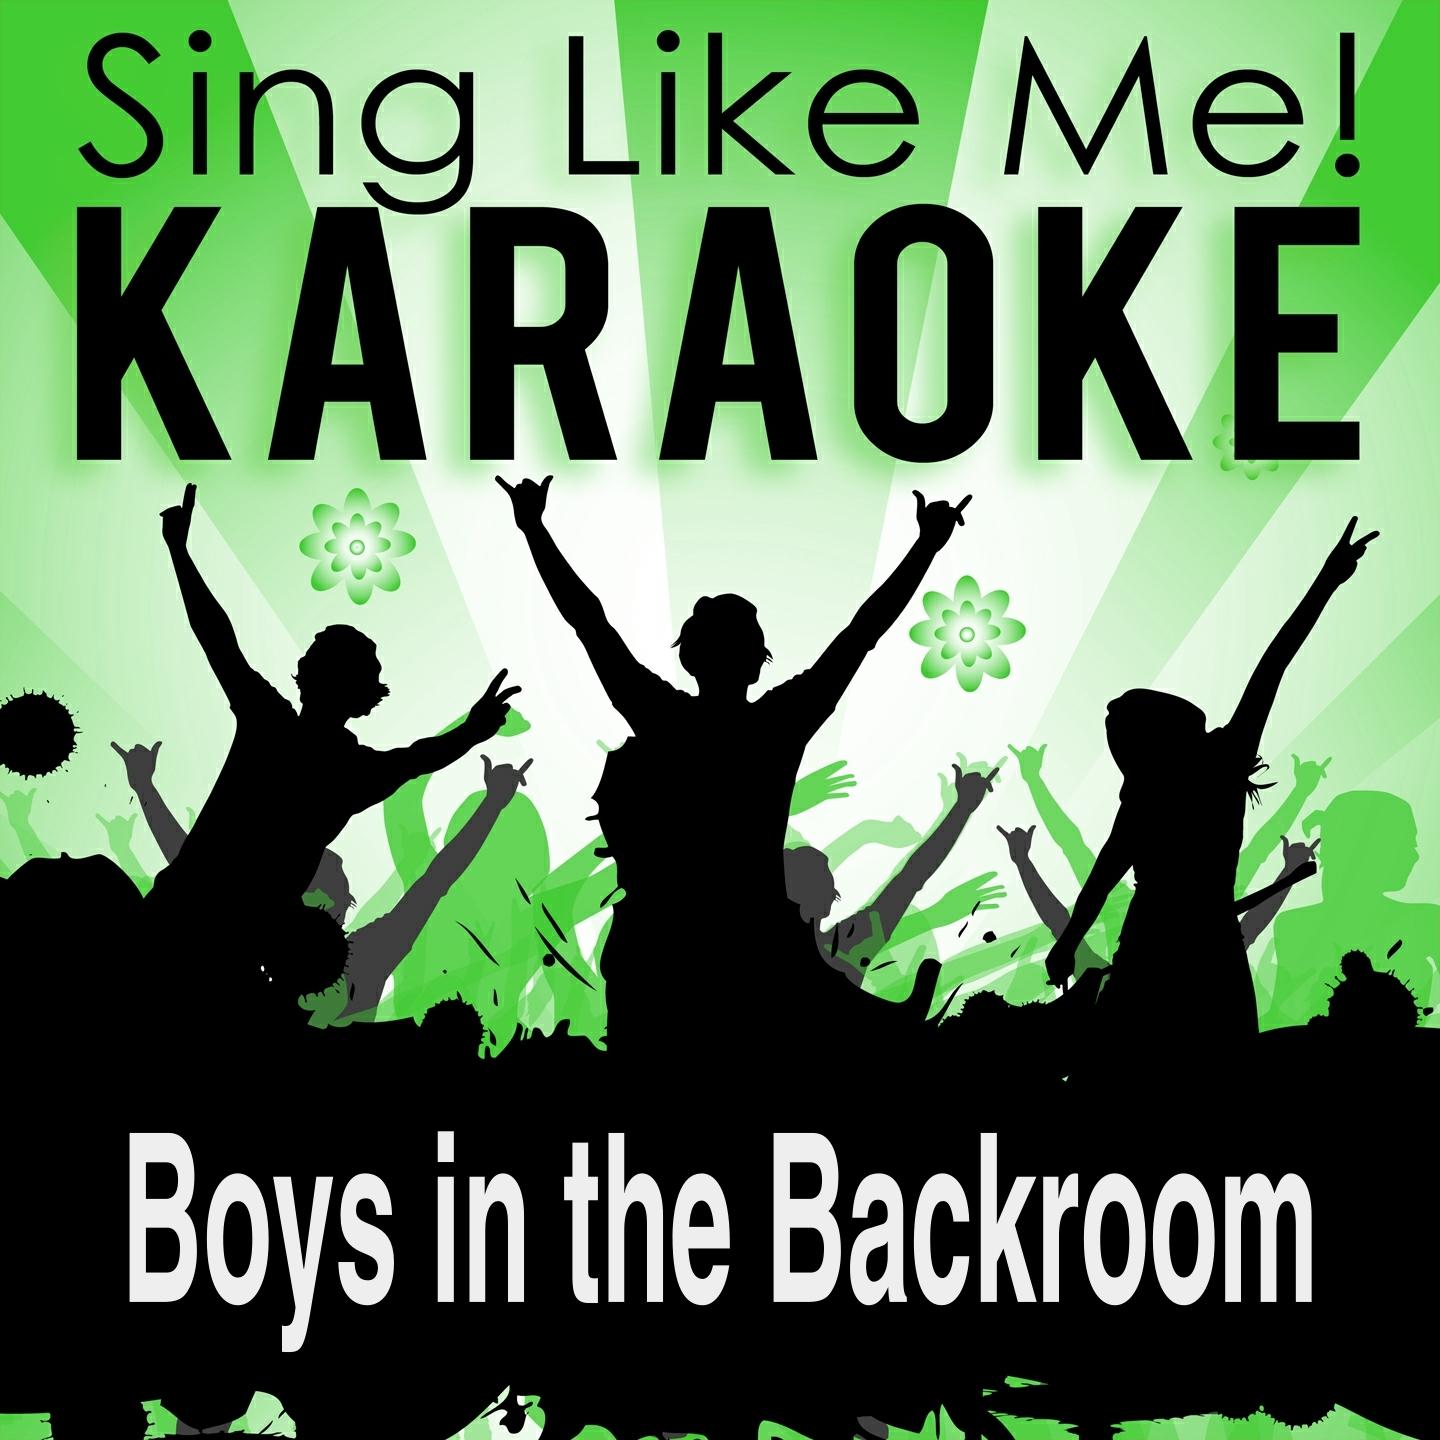 Boys in the Backroom (Karaoke Version with Guide Melody) (Originally Performed By Marlene Dietrich)